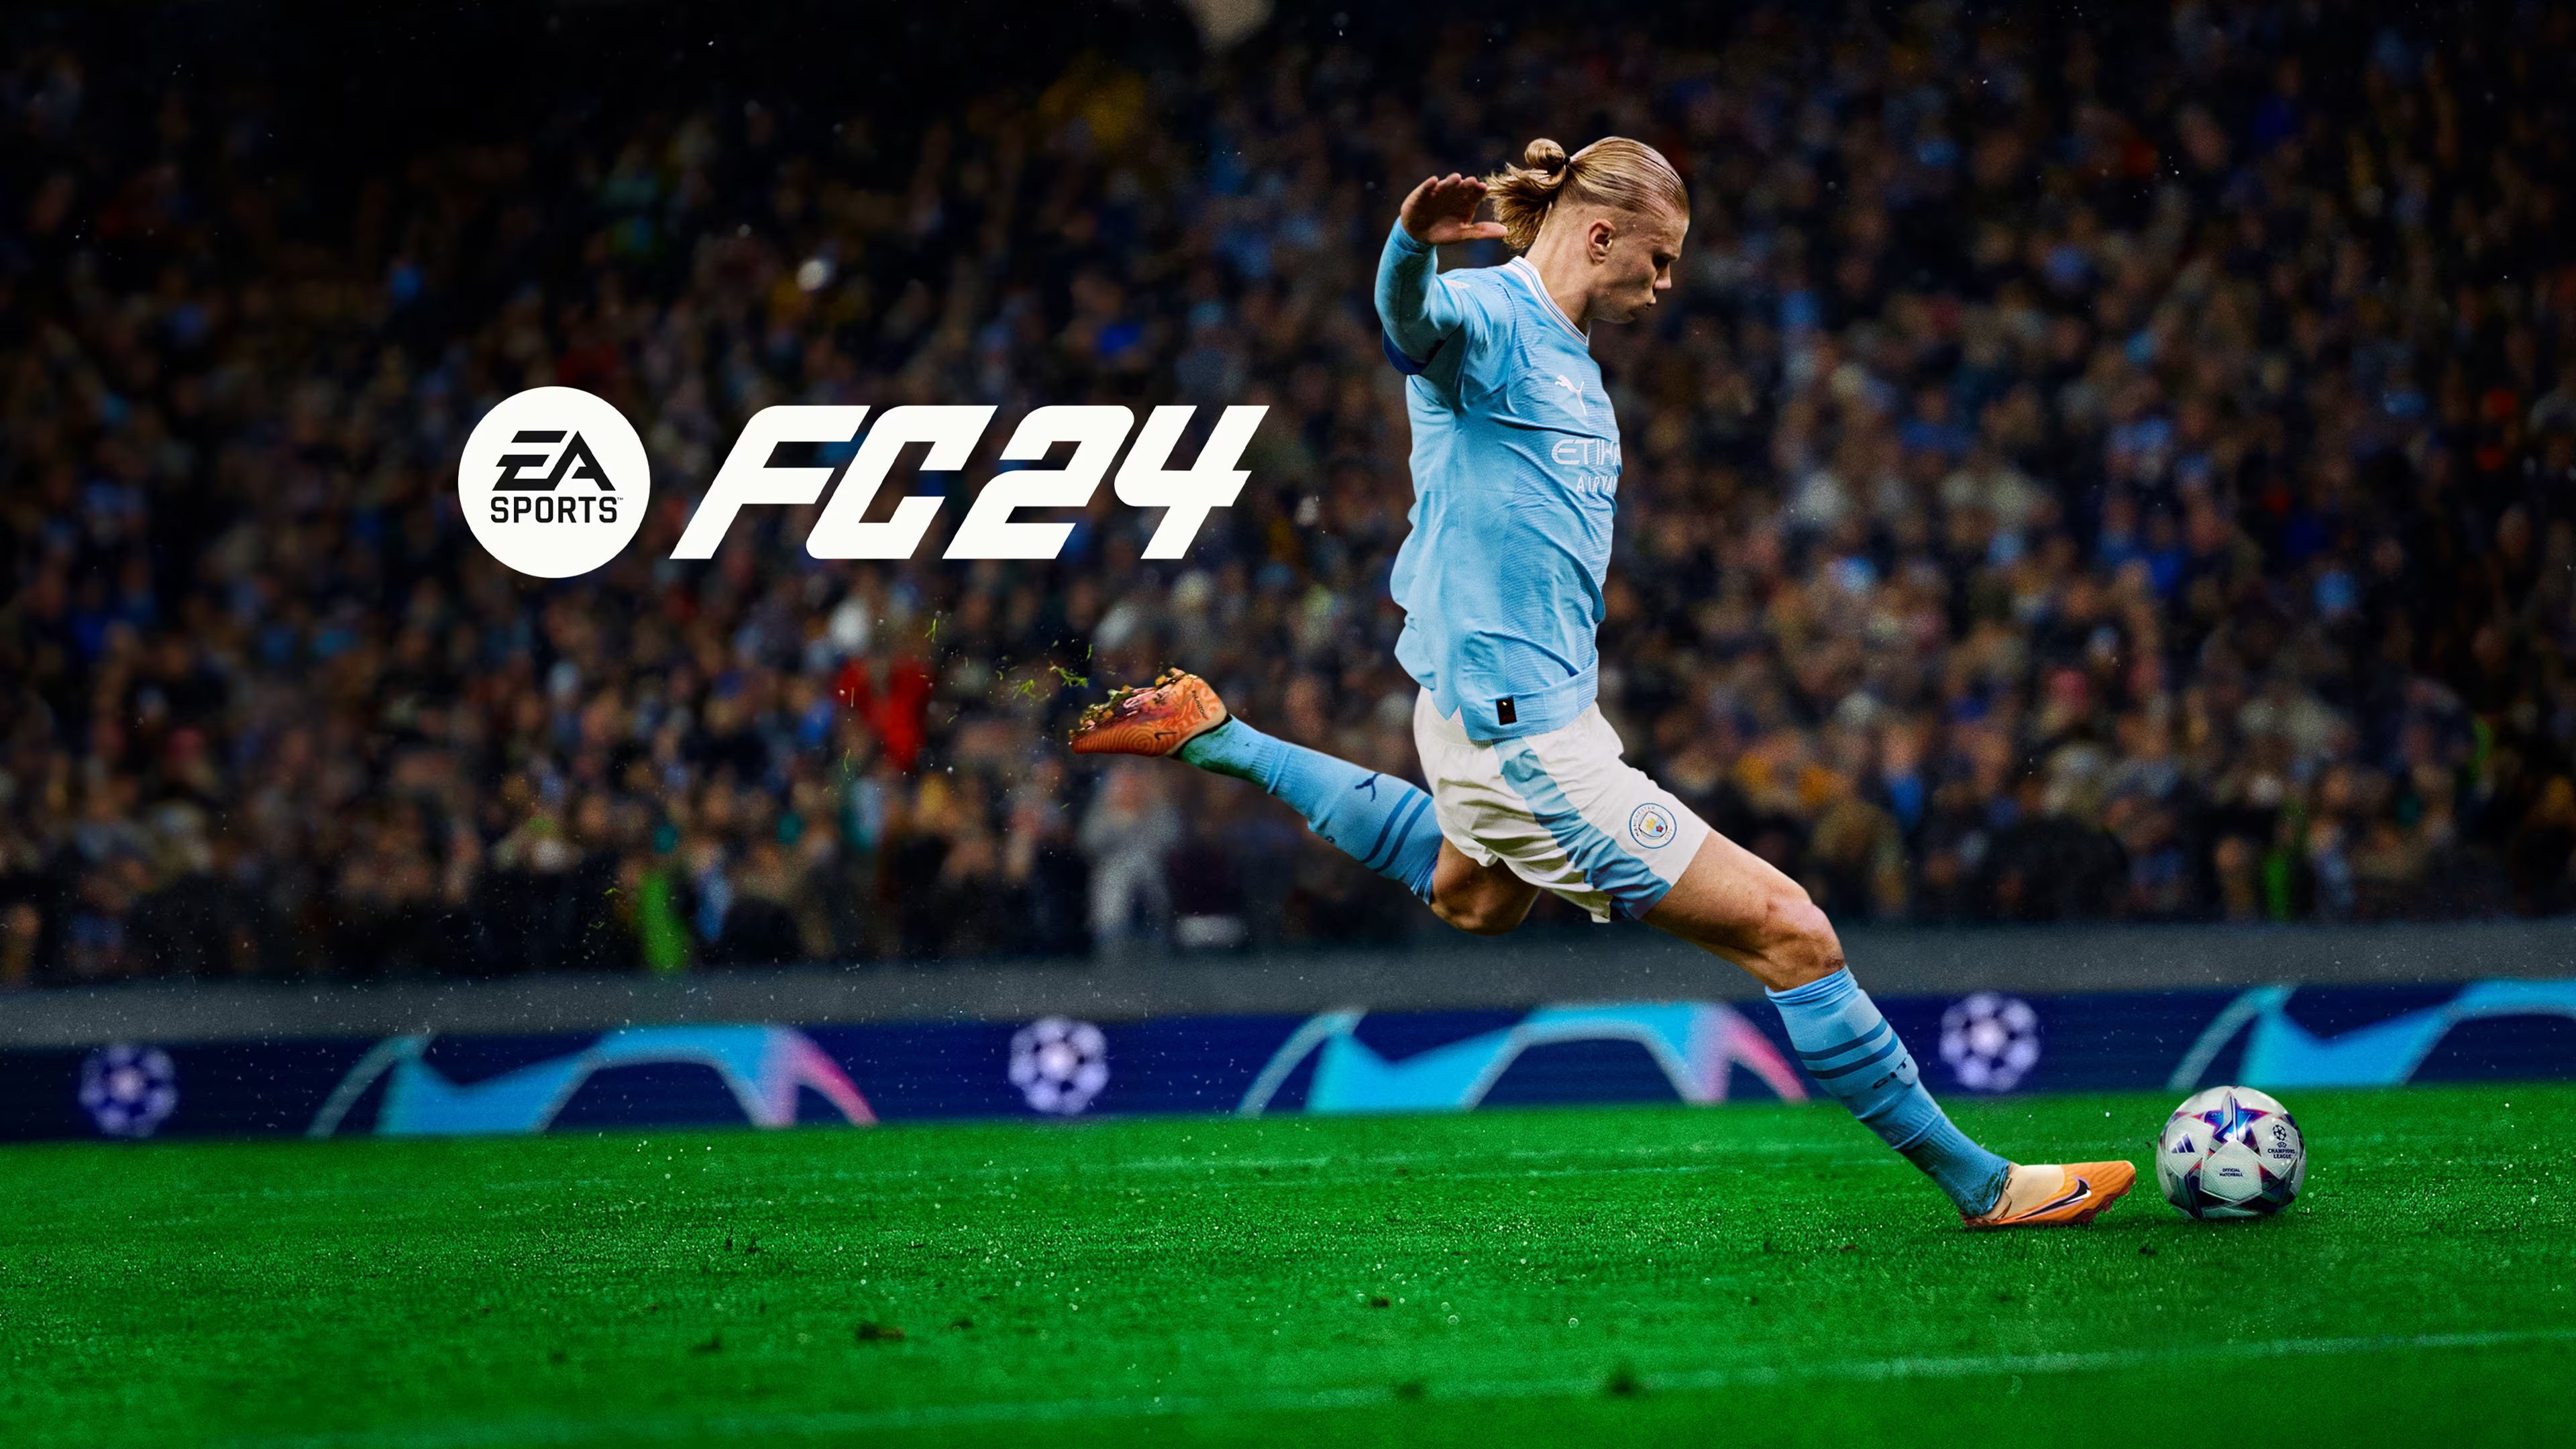 Can PS5 users play EA FC 24 with PS4 players?